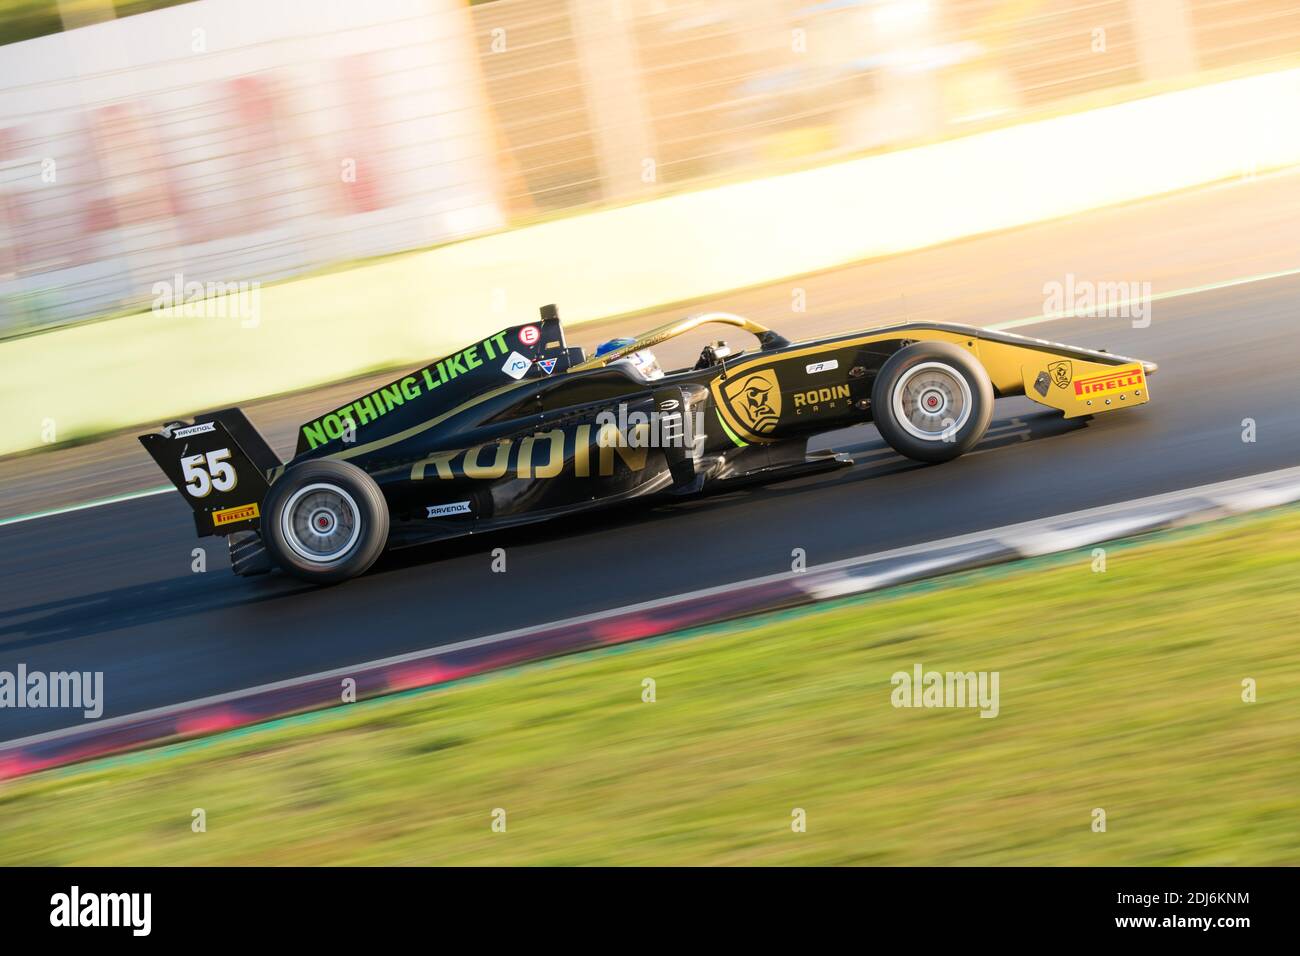 Racing car single seater modern formula in action close up blurred motion background sun flare effect Stock Photo